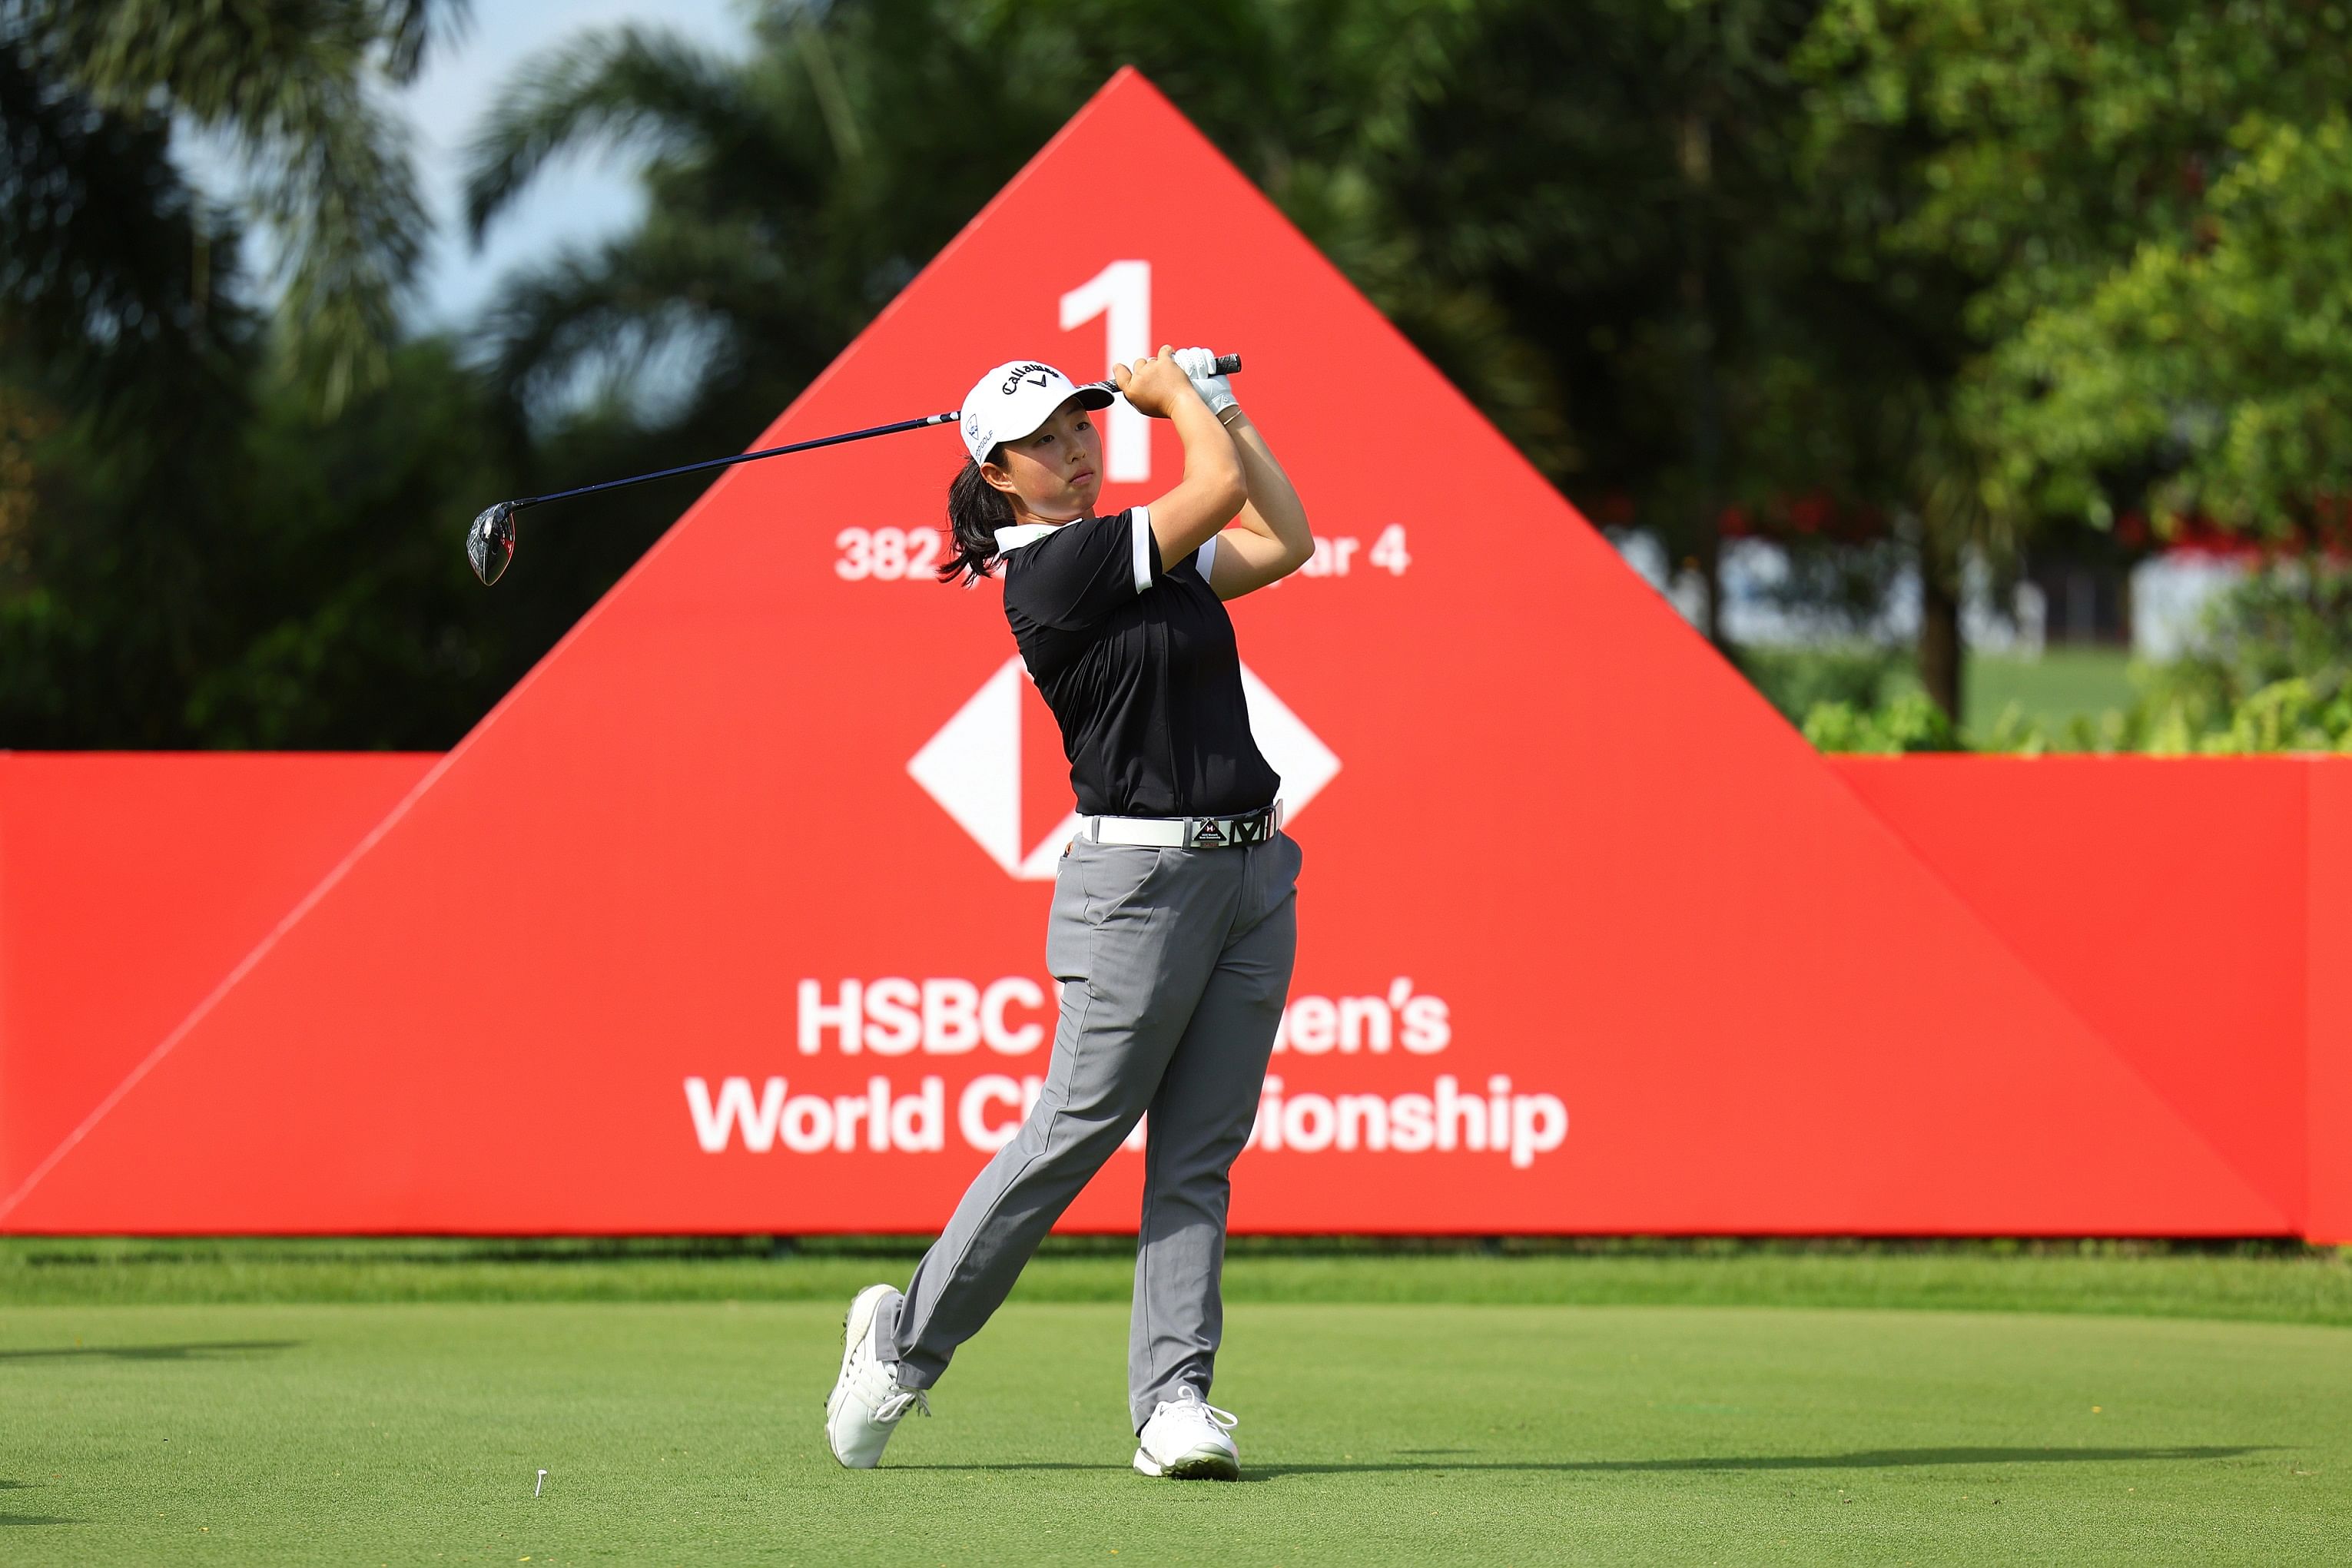 China’s female golfers closing the gap on Asia’s elite